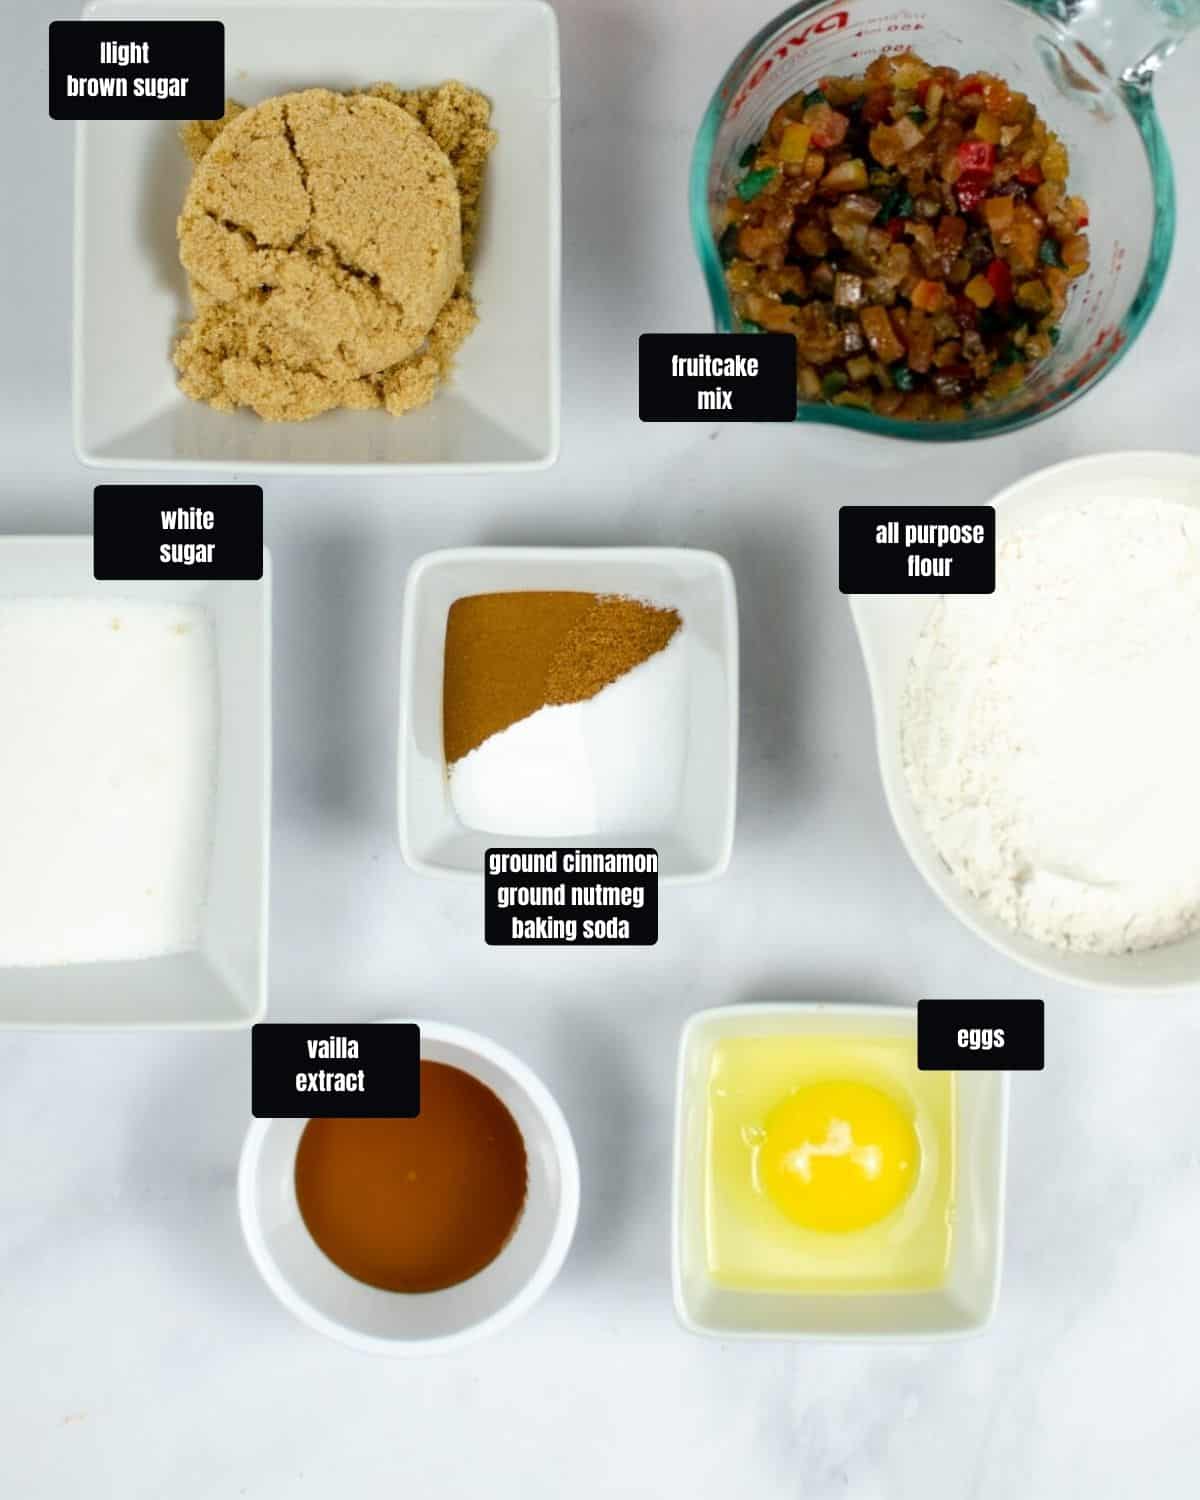 Ingredients to make fruitcake cookies in bowls on a white table.